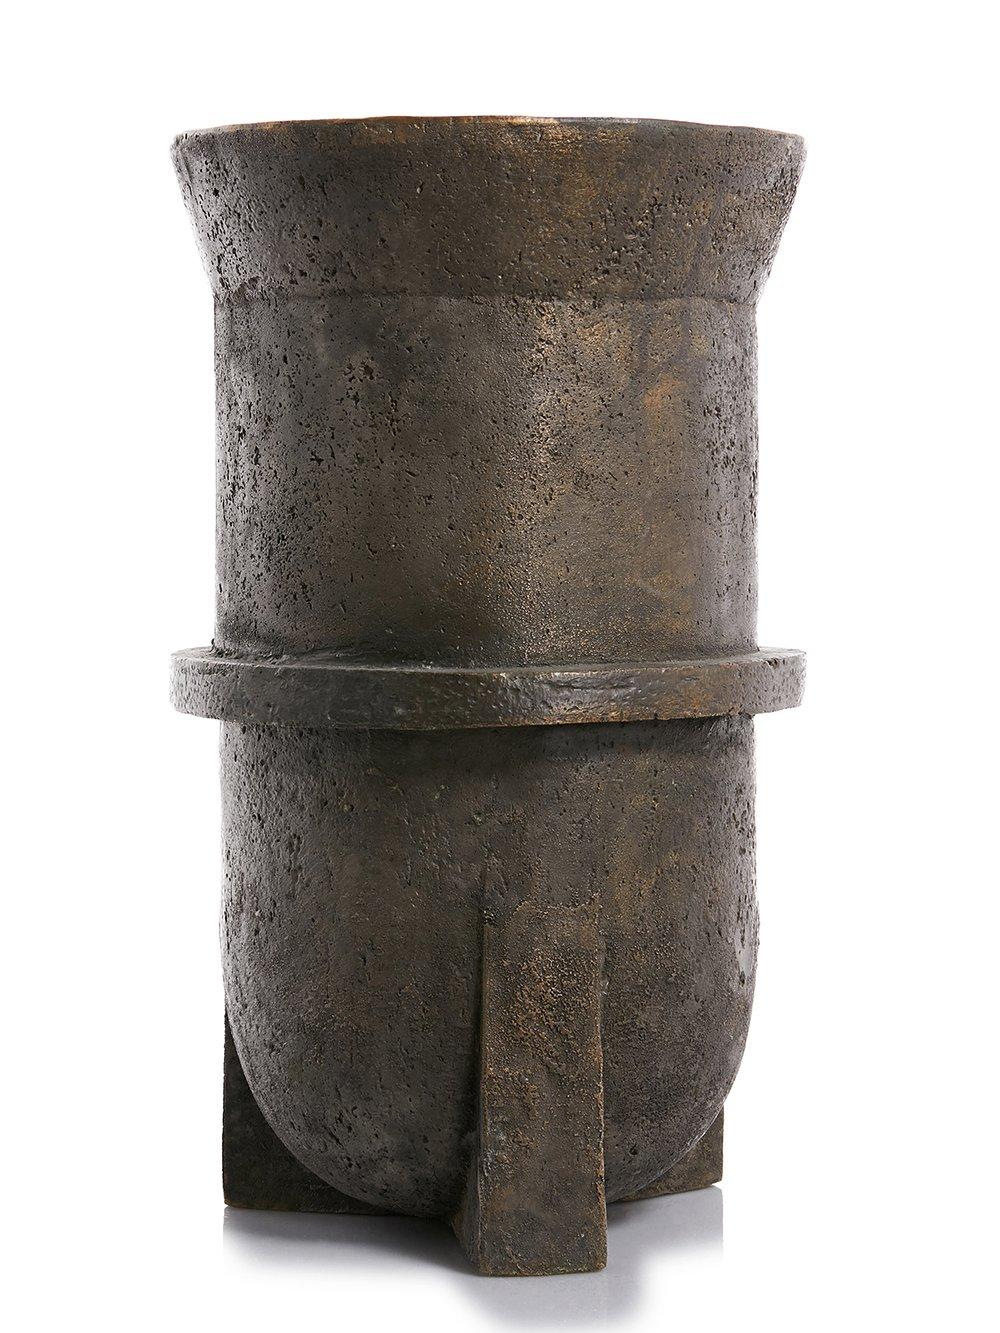 Contemporary bronze vase - Urn by Rick Owens.
2007.
Dimensions: L 34 x W 34 x H 57 cm.
Materials: bronze.
Weight: 37 kg.

Available in black and nitrate finish (dark brown).

Rick Owens is a California-born fashion and furniture has